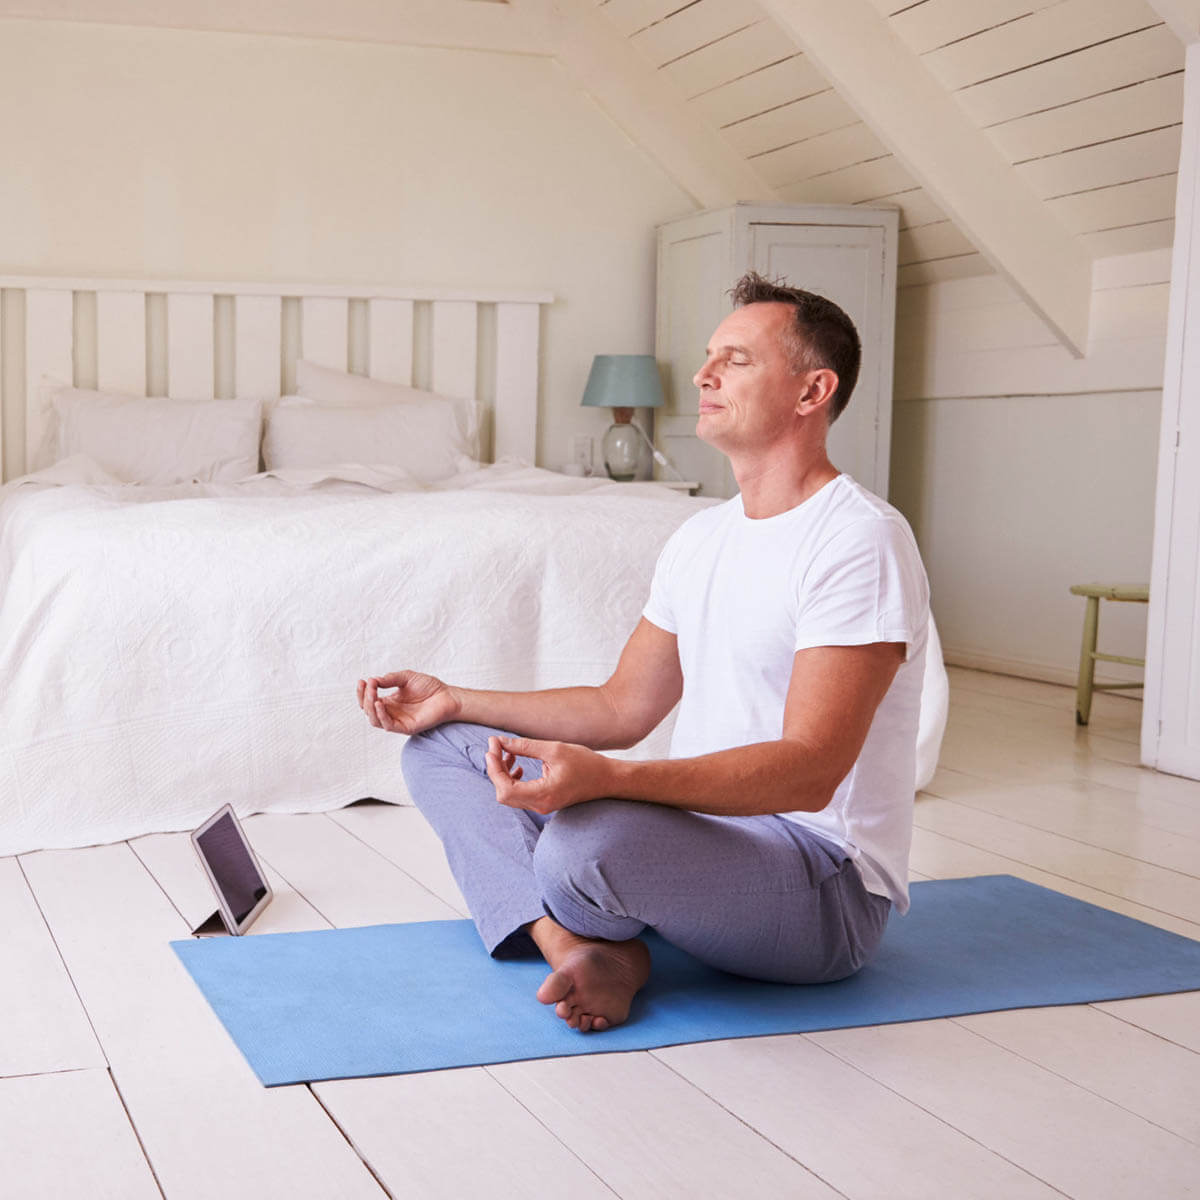 A man uses yoga as a sleep remedy  in his bedroom with a tablet sitting next to him